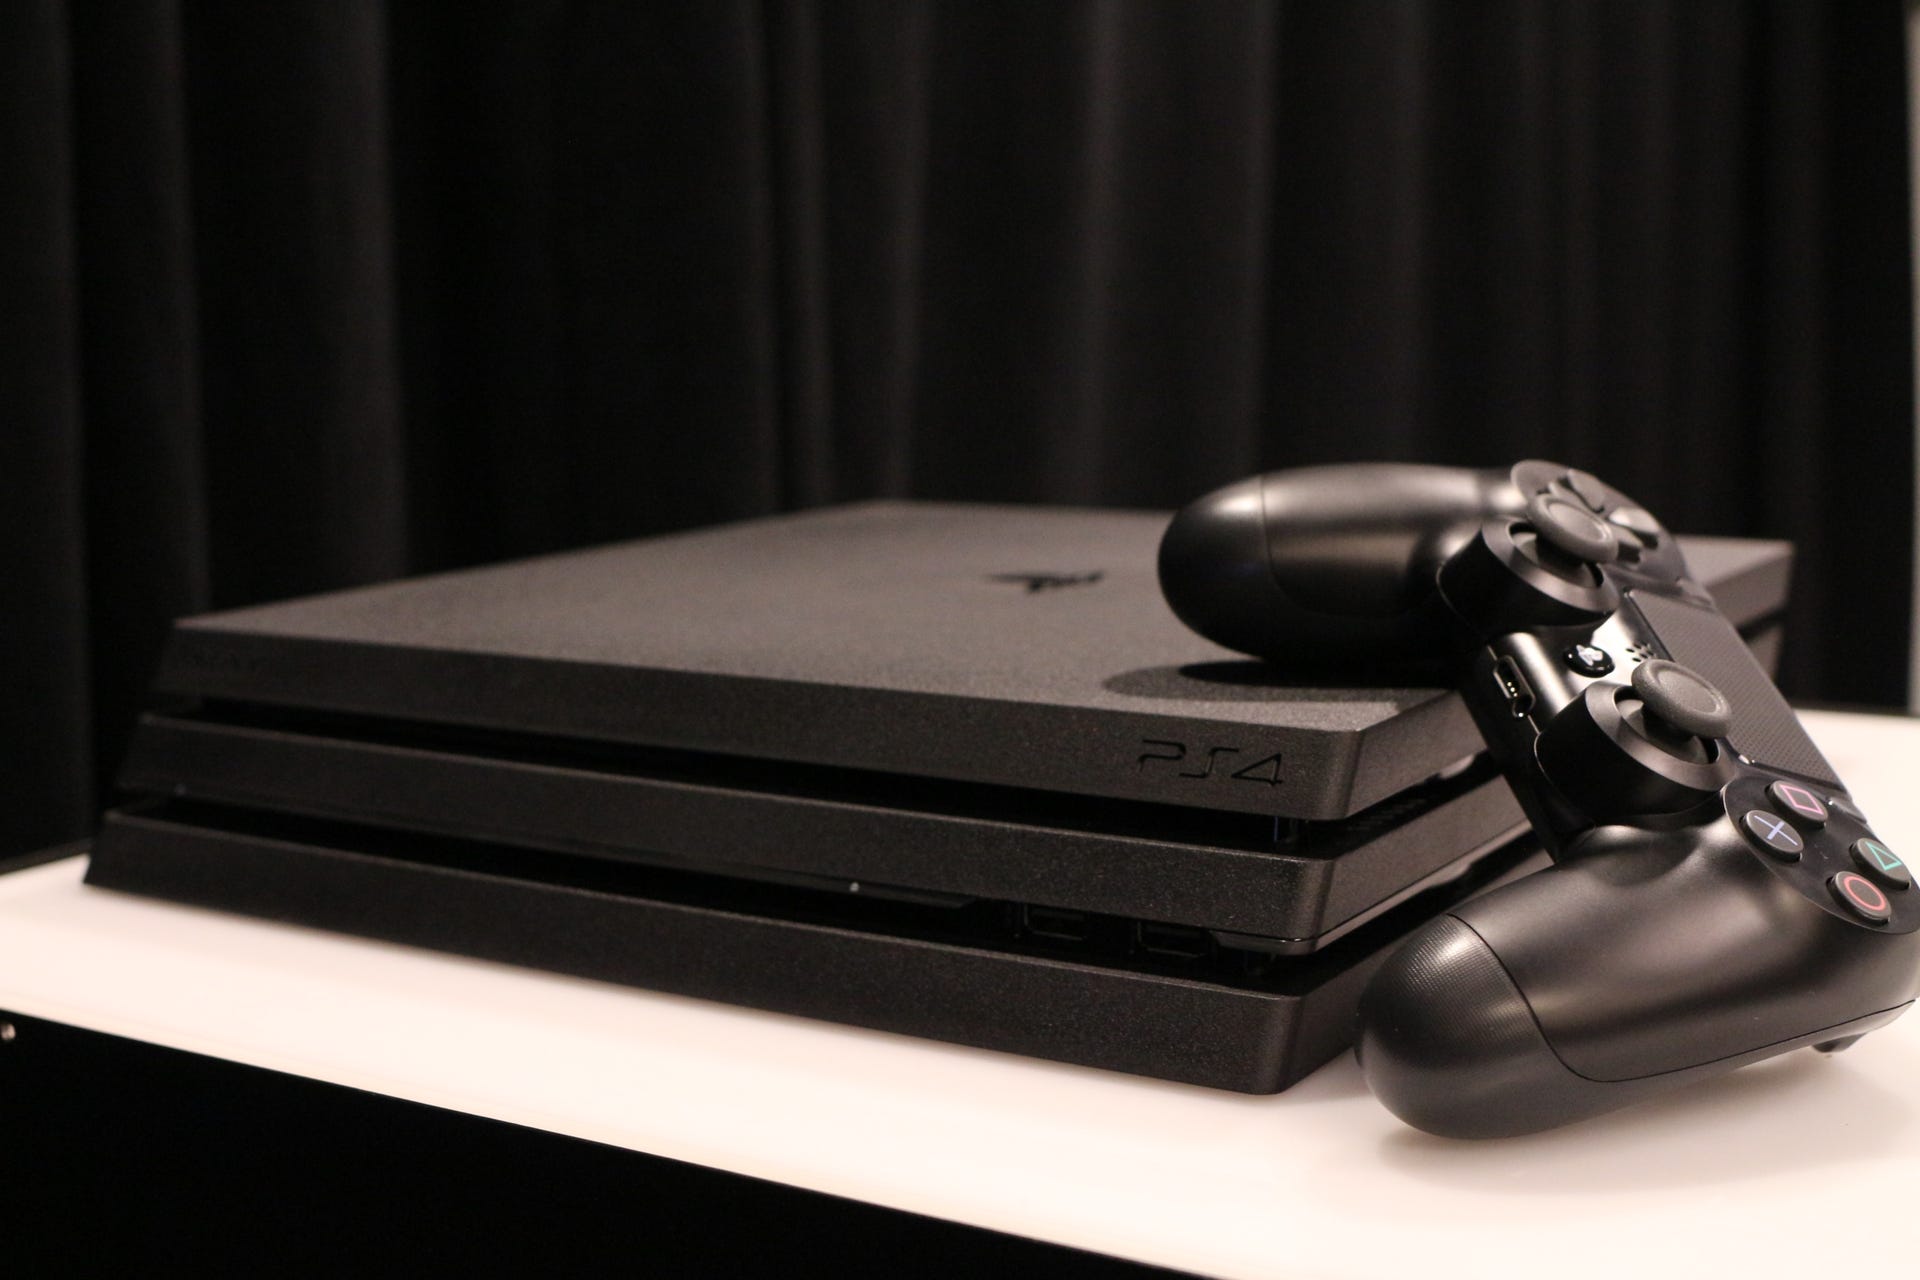 Sony PlayStation 4 Pro review: Sony PlayStation 4 Pro: $399, November 10,  with better graphics, 4K and HDR -- but no 4K Blu-ray - CNET